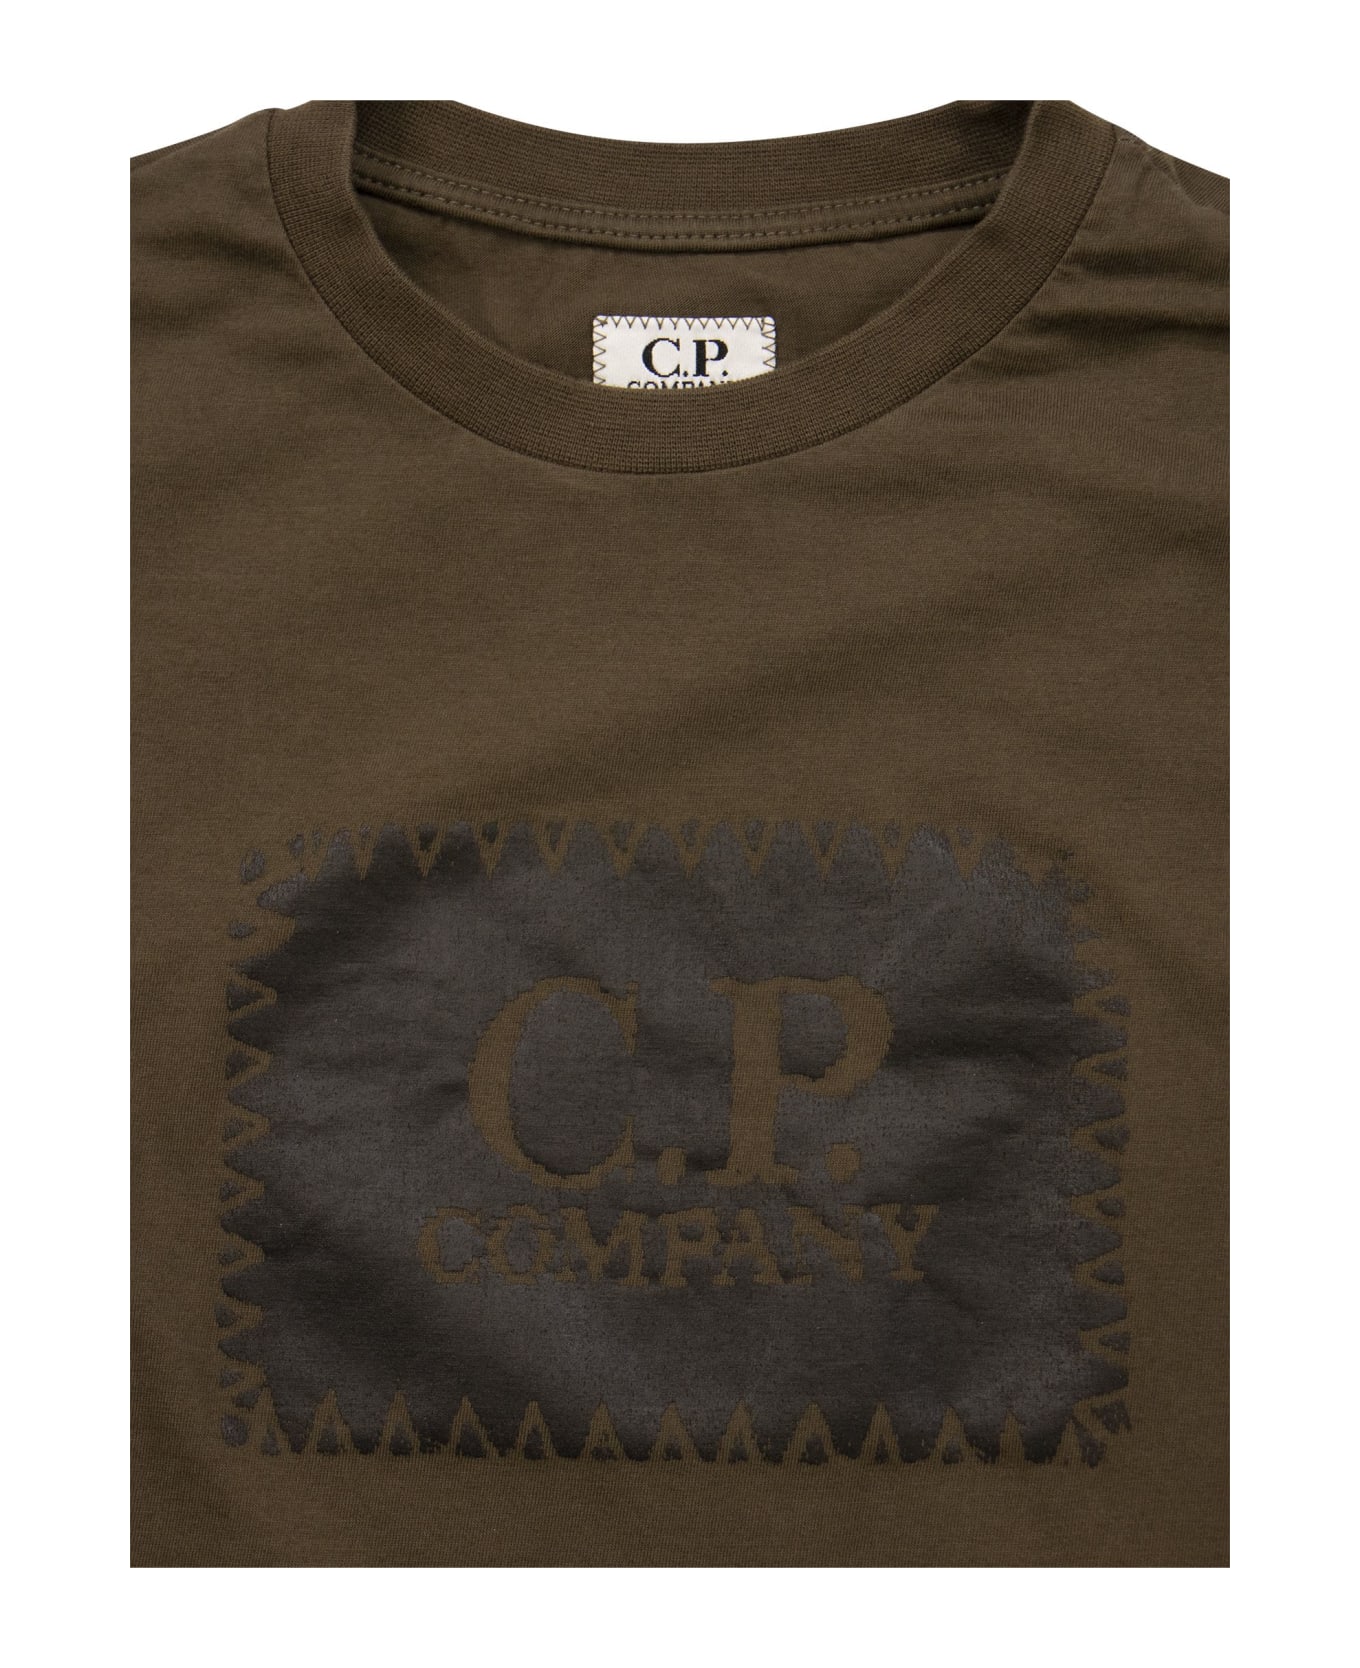 C.P. Company Logo Long Sleeved T-shirt - Forest